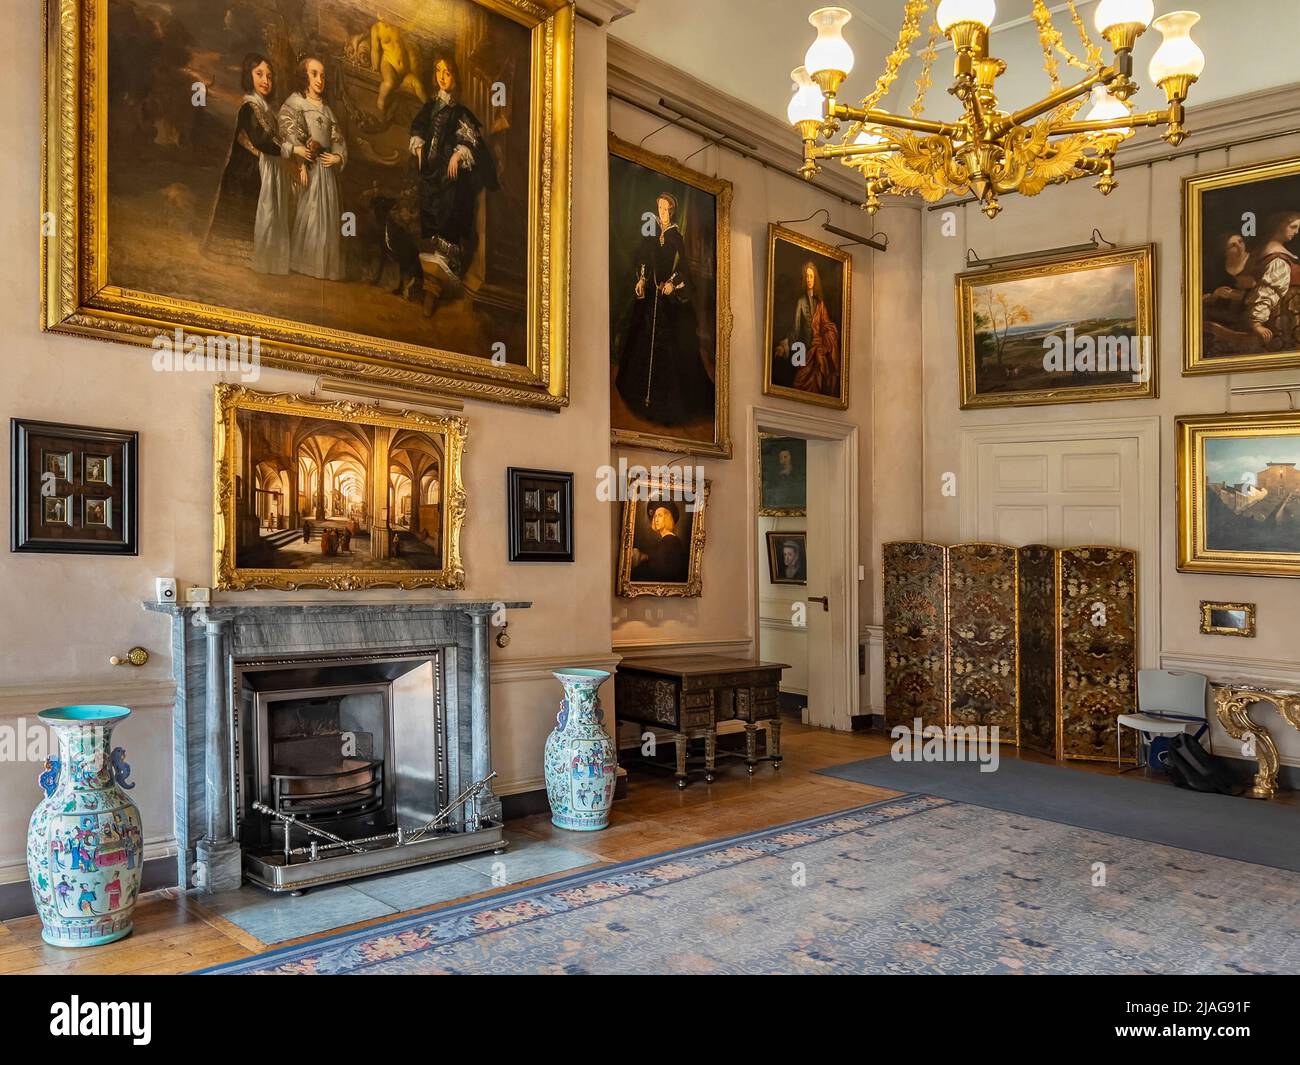 The Somerset Room at Petworth House in West Sussex, United Kingdom.  Petworth is a late 17th-century Grade I listed country house, rebuilt in 1688 by Stock Photo